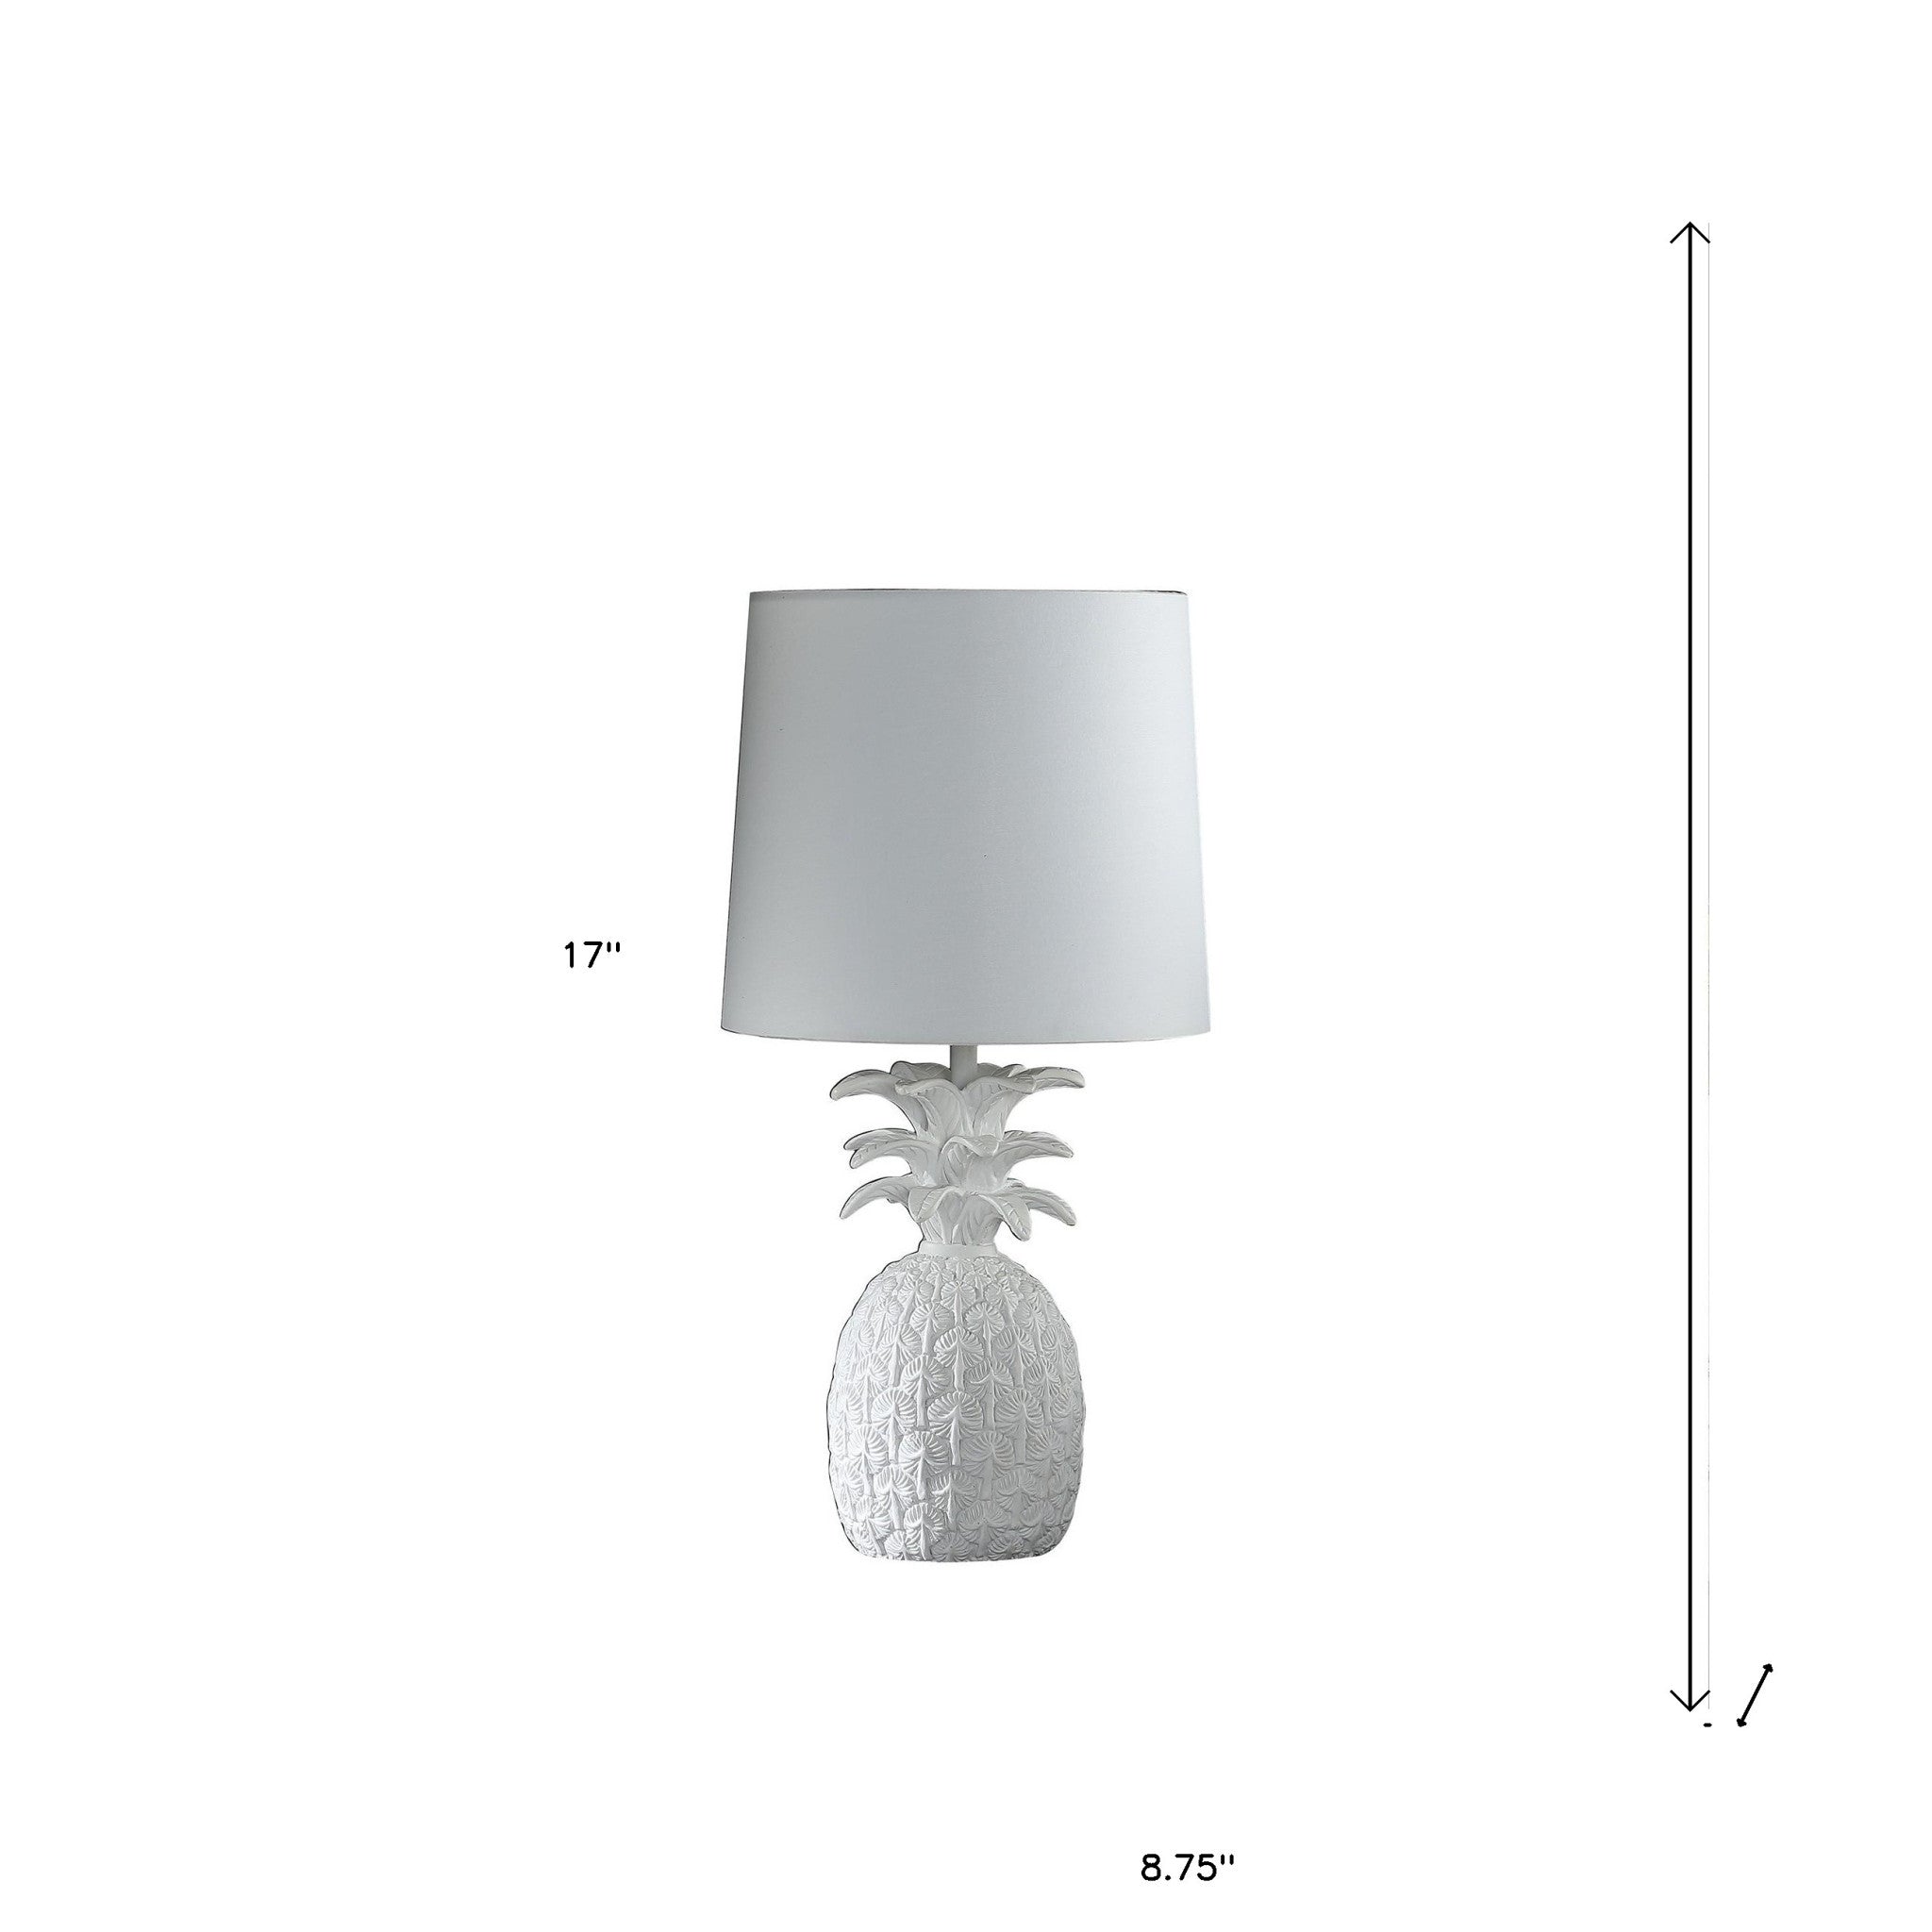 17" White Bedside Table Lamp With White Empire Shade